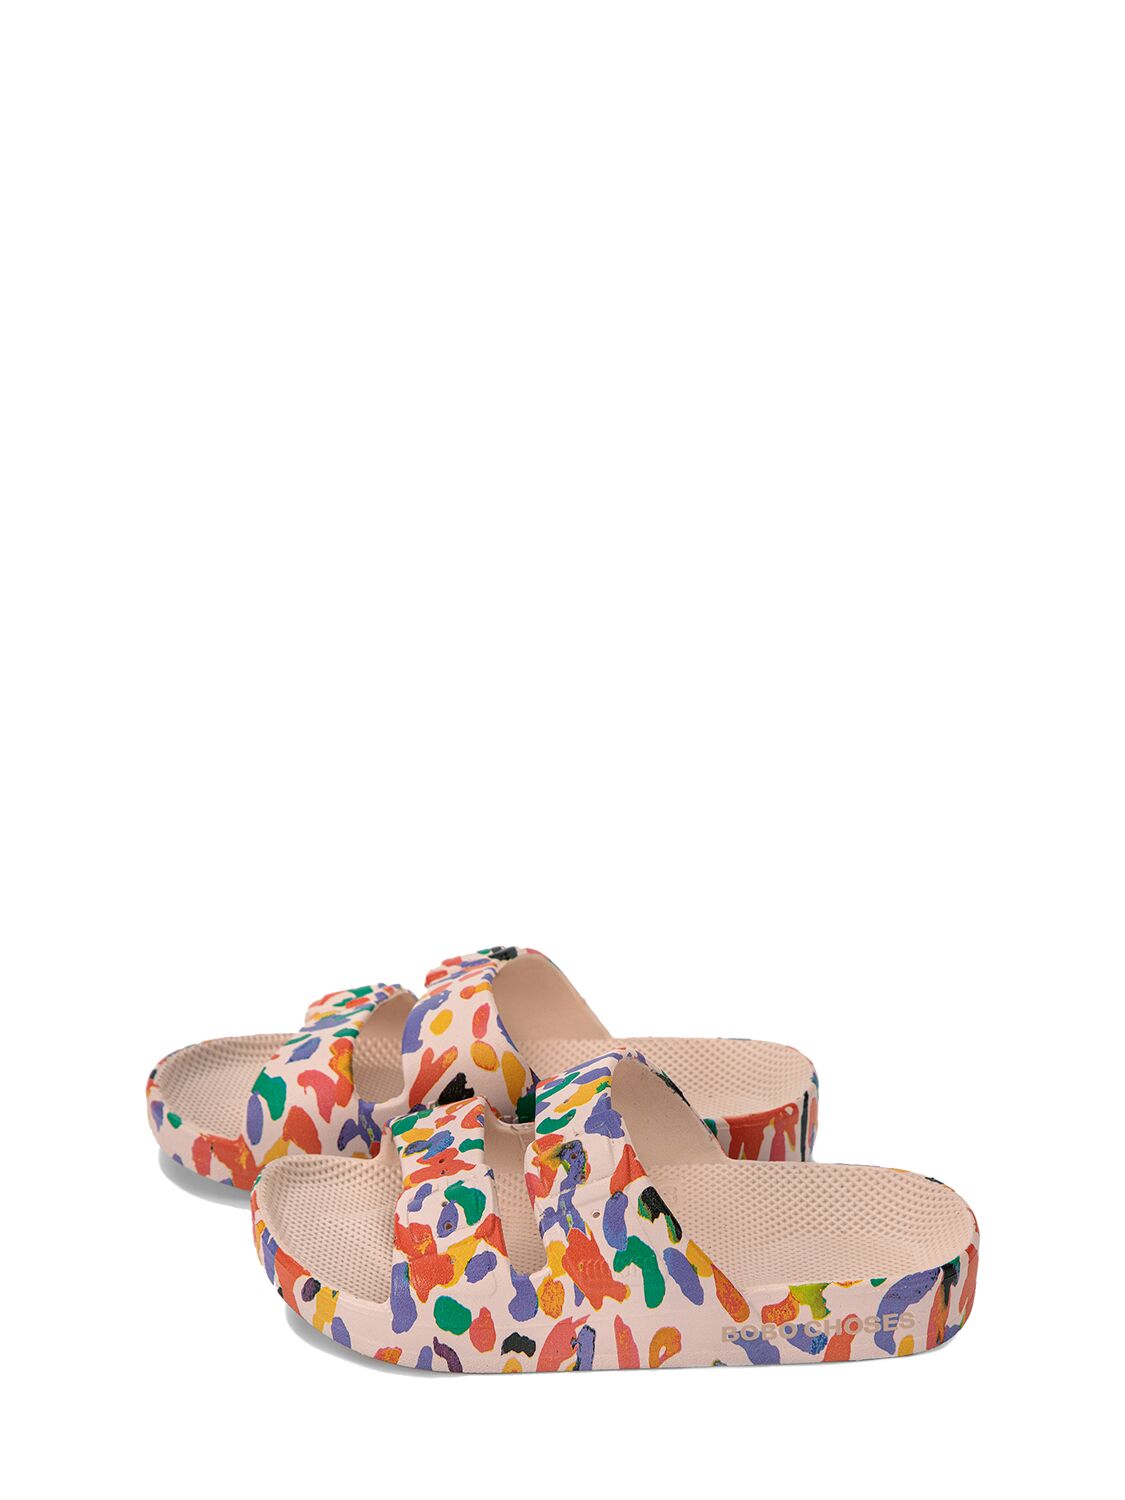 Image of Printed Rubber Sandals